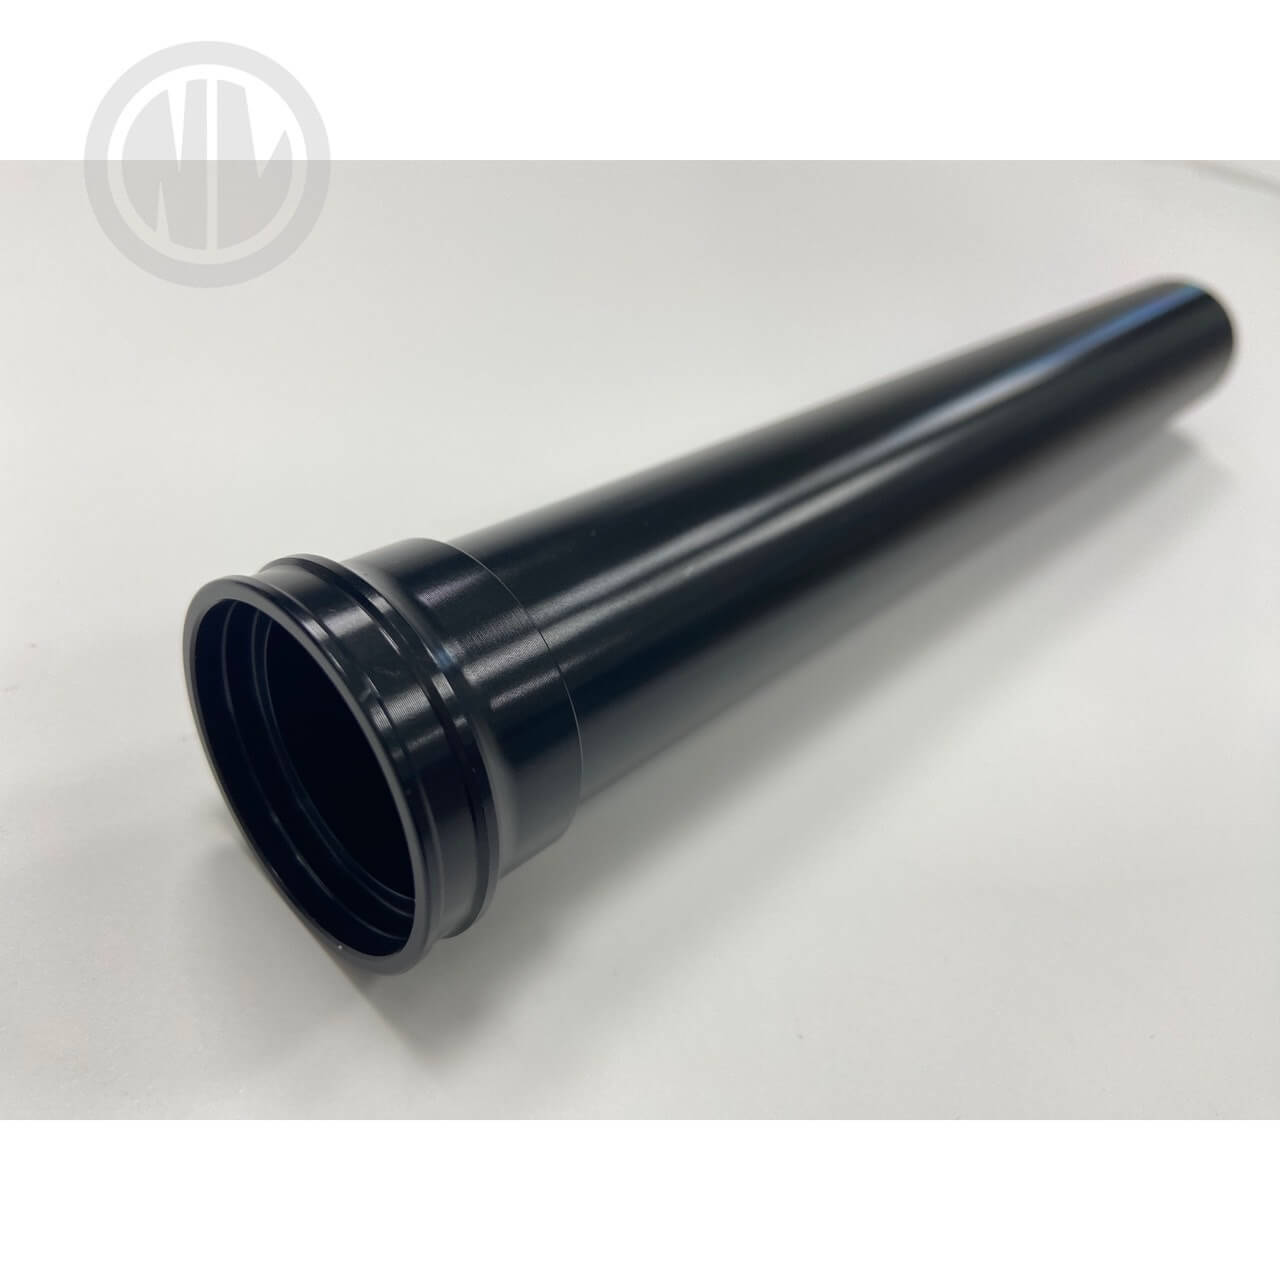 Suspension Outer tube SOT-001